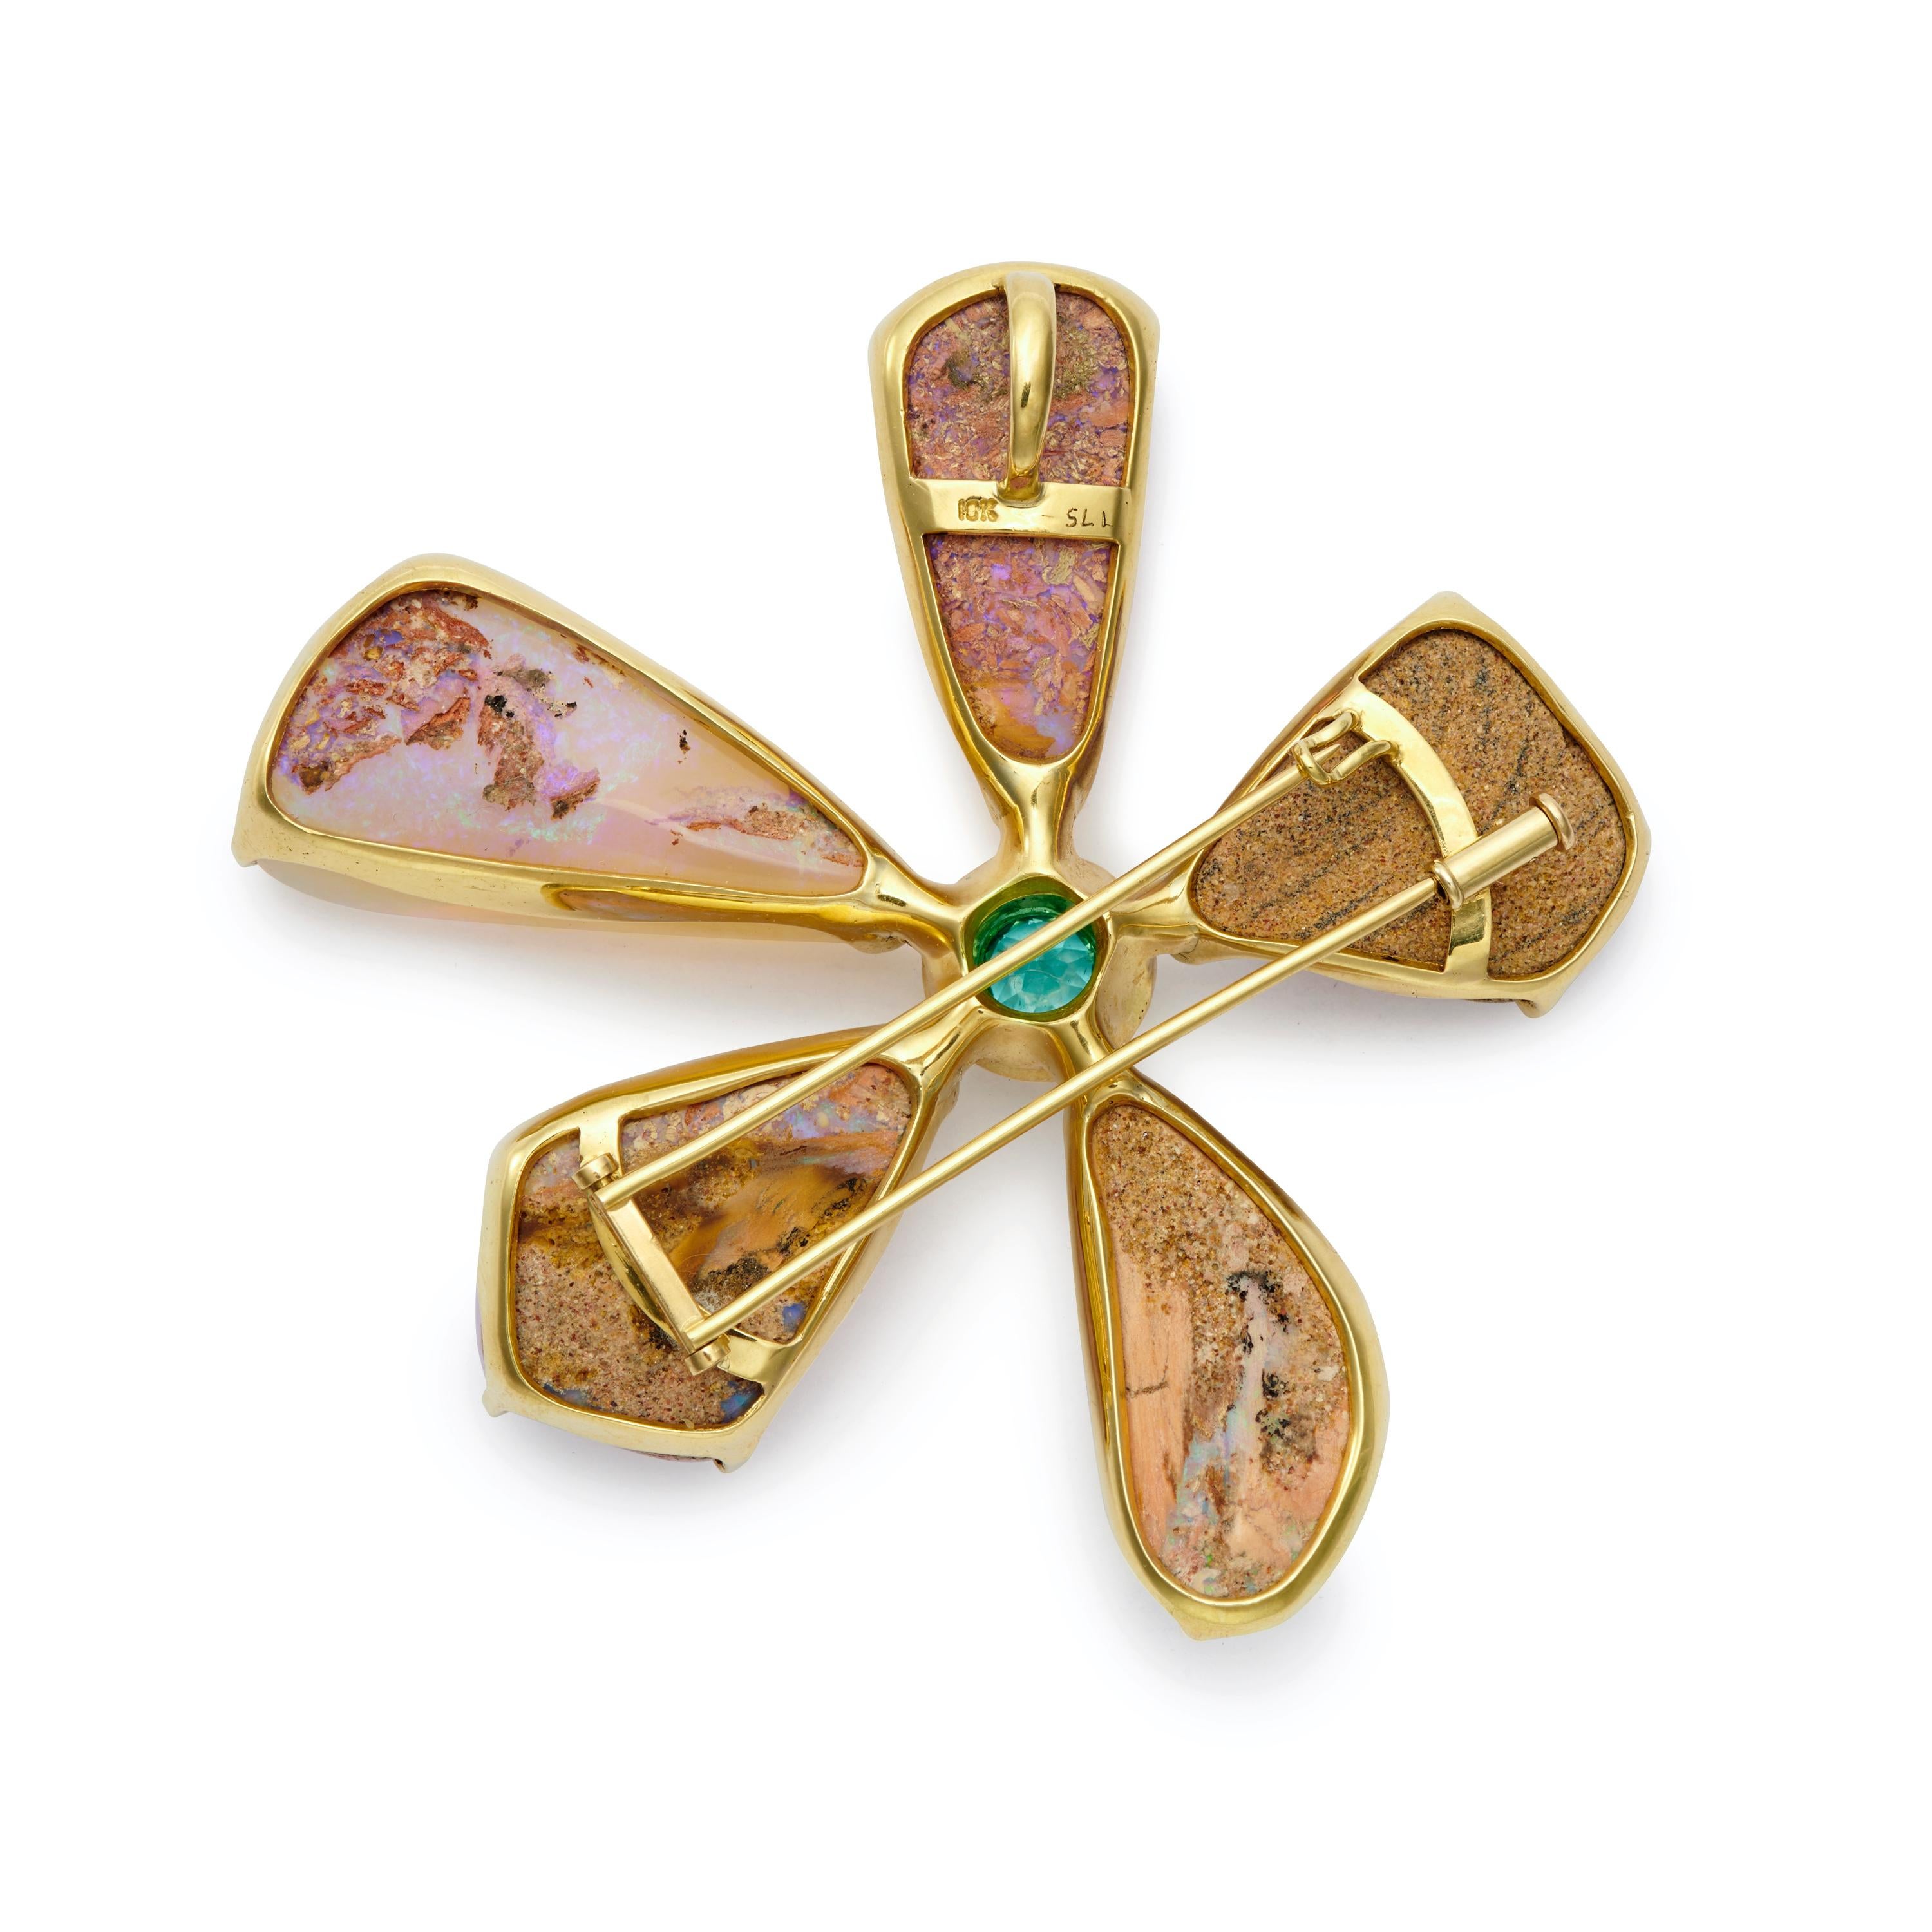 Petals of Opal, with a detailed center of Paraiba Tourmaline (1.13 Carat) and Diamonds, form this spectacular Flower Pin/Pendant. Set in 18 Karat Gold.

Chain not included in the cost of pin/pendant.